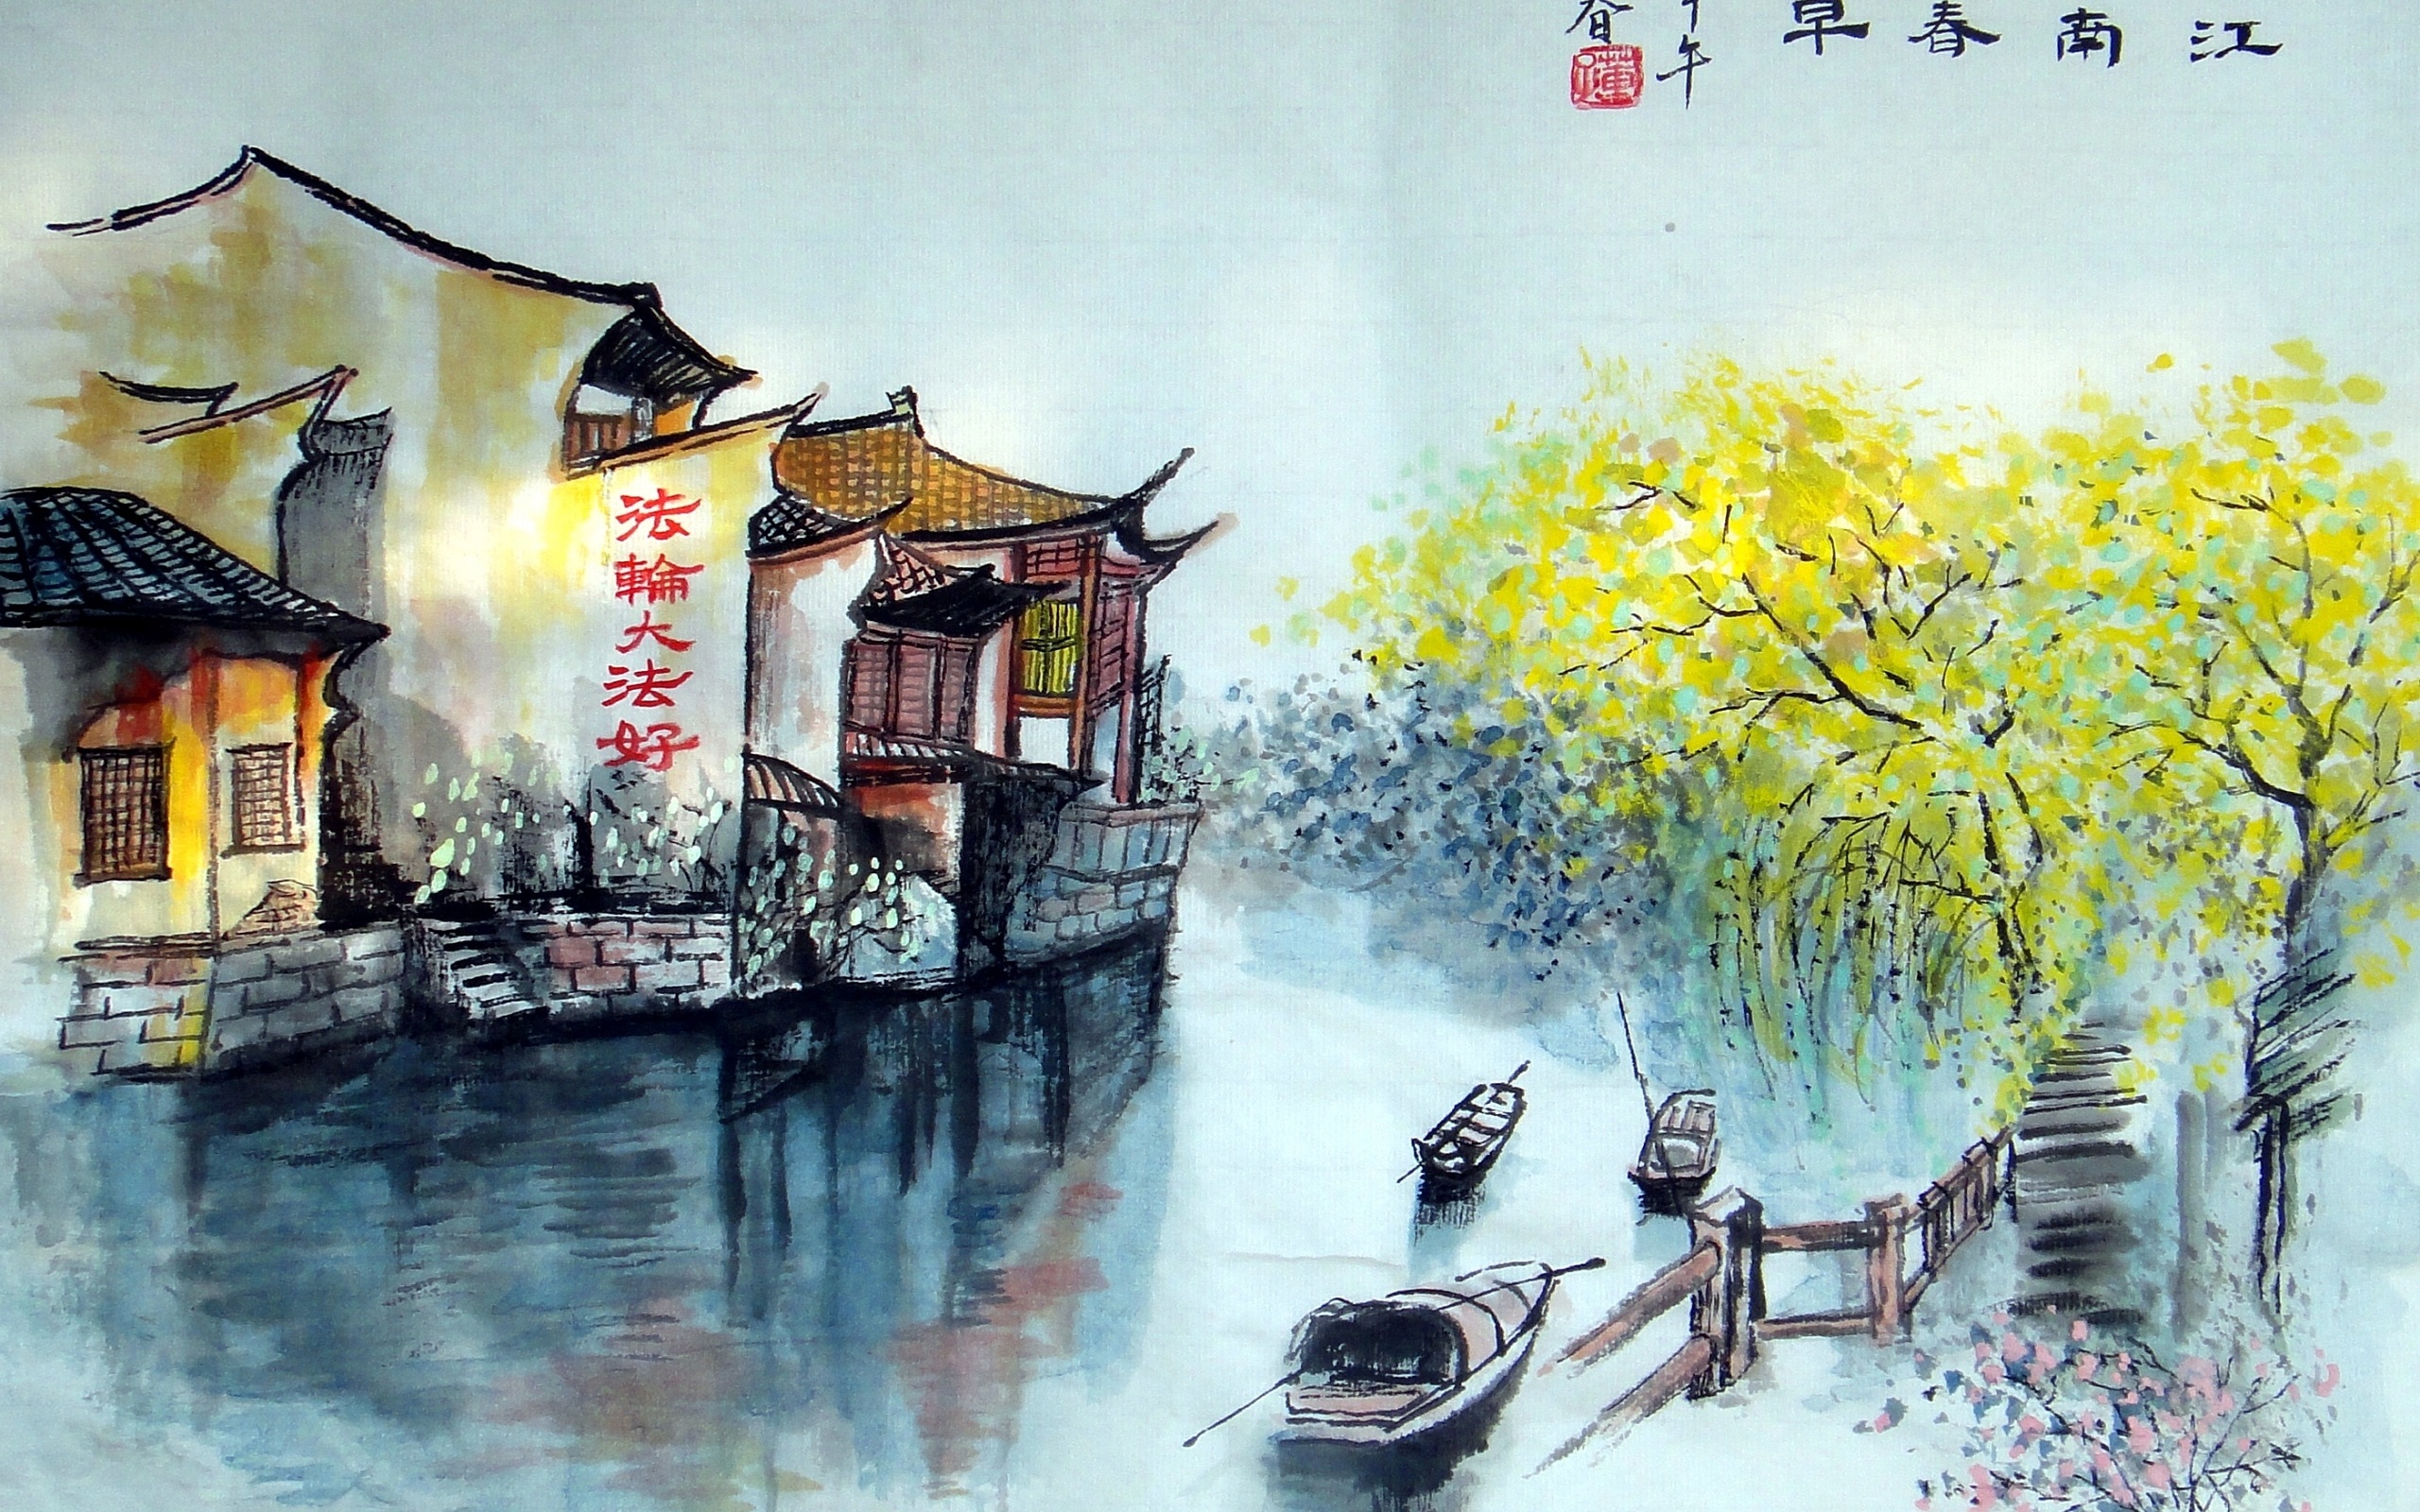 Img Hd, Chinese Landscape Watercolor Painting, Cecilia - Chinese Paintings Wallpaper Hd - HD Wallpaper 